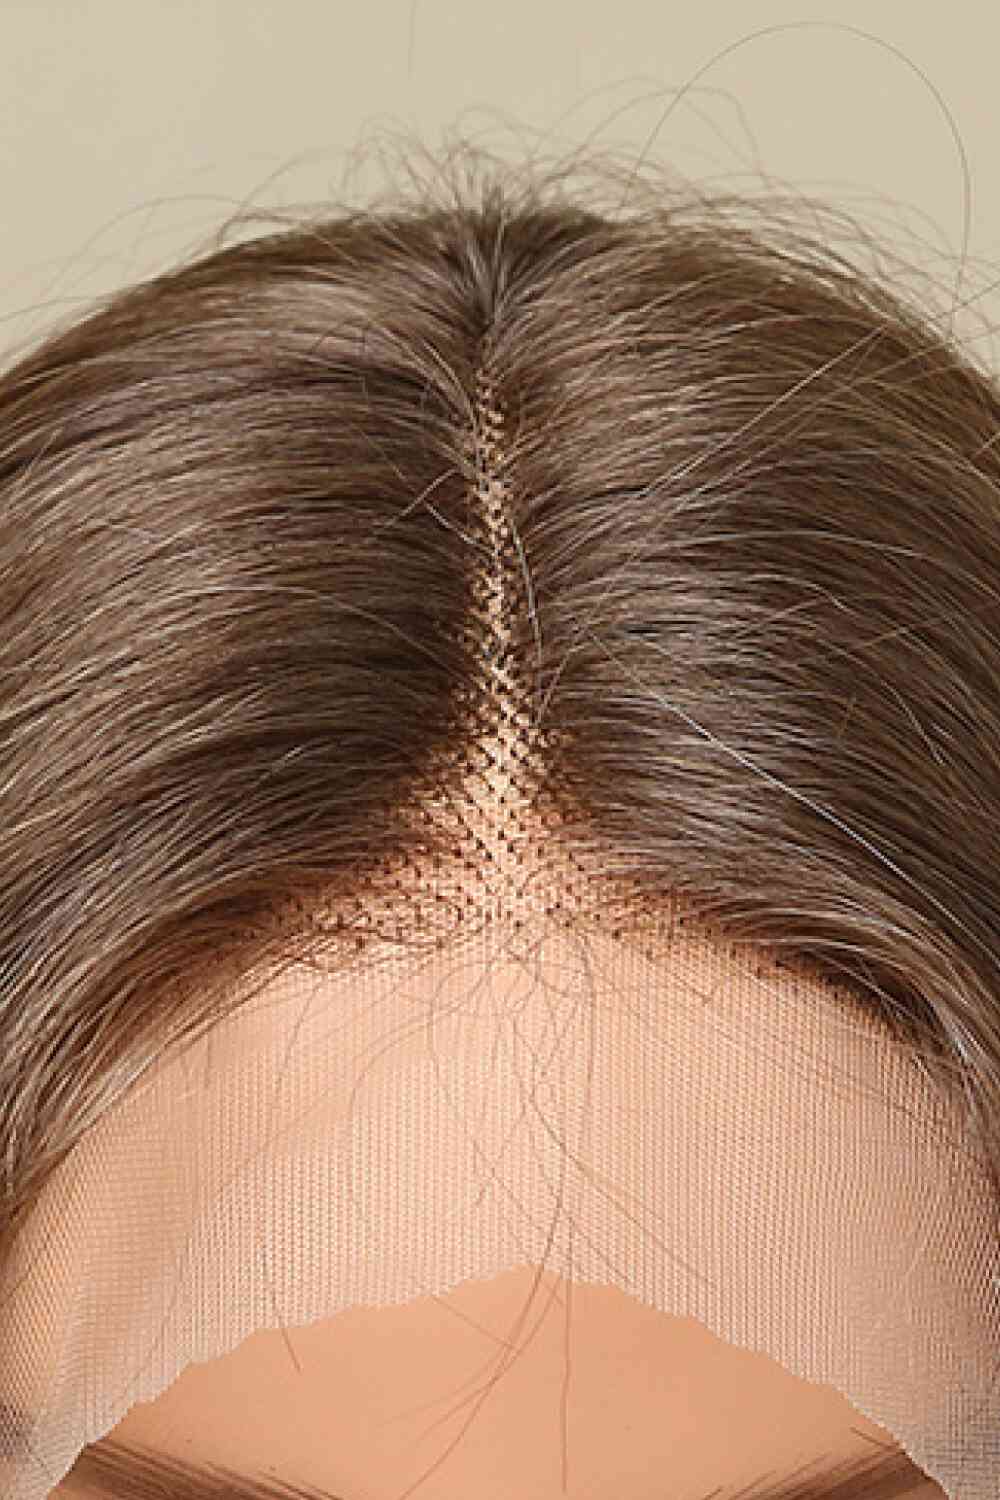 13*2" Lace Front Wigs Synthetic Long Wave 26" 150% Density in Golden Brown - TRENDMELO